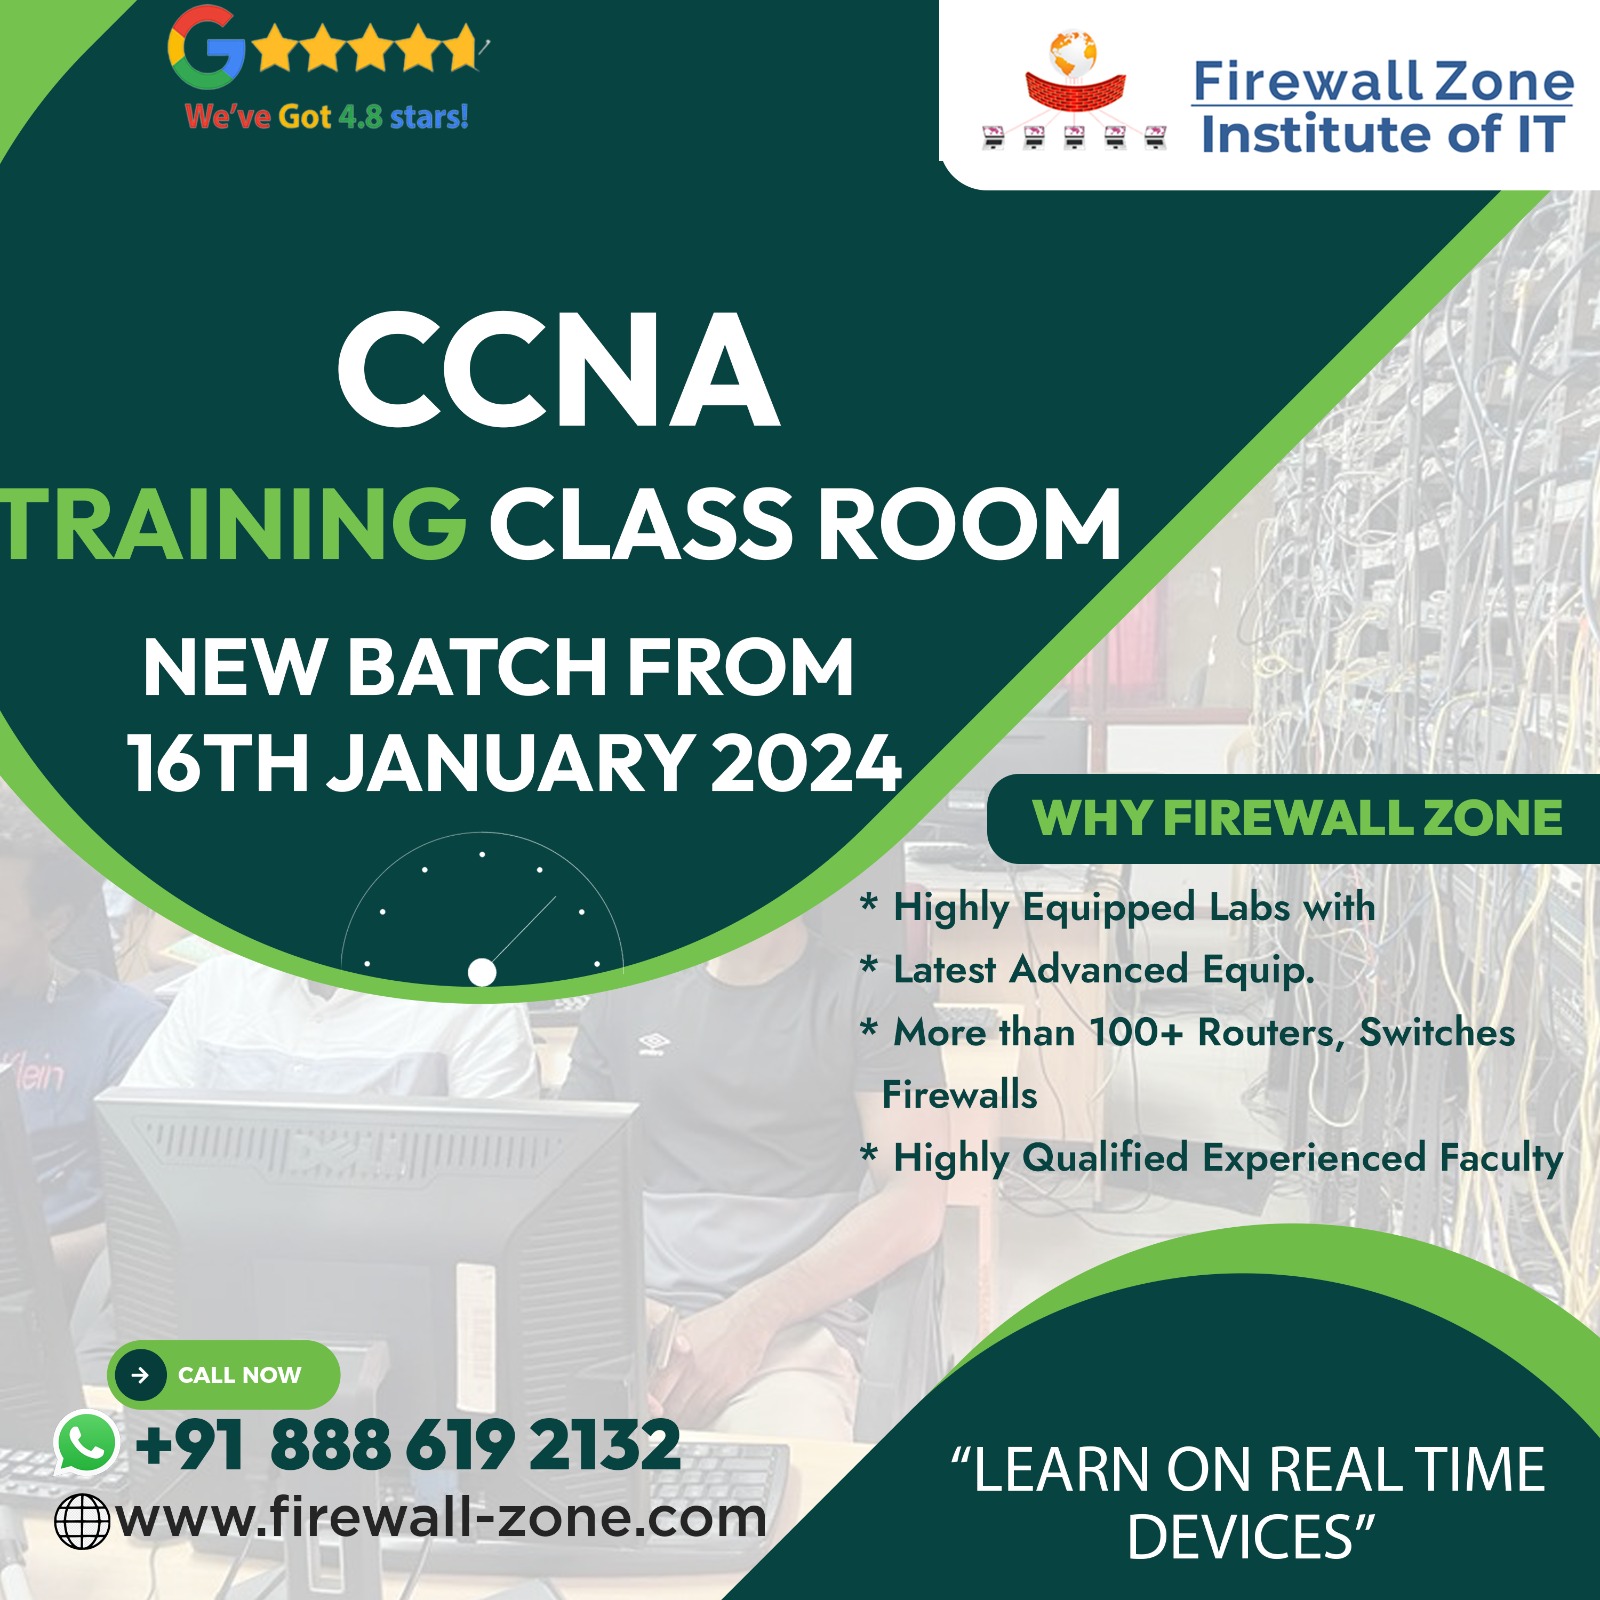 CCNA Routing and Switching Training Program in Hyderabad Starts on 16th January 2024 at Firewall-zone Institute of IT, Hyderabad, Telangana, India